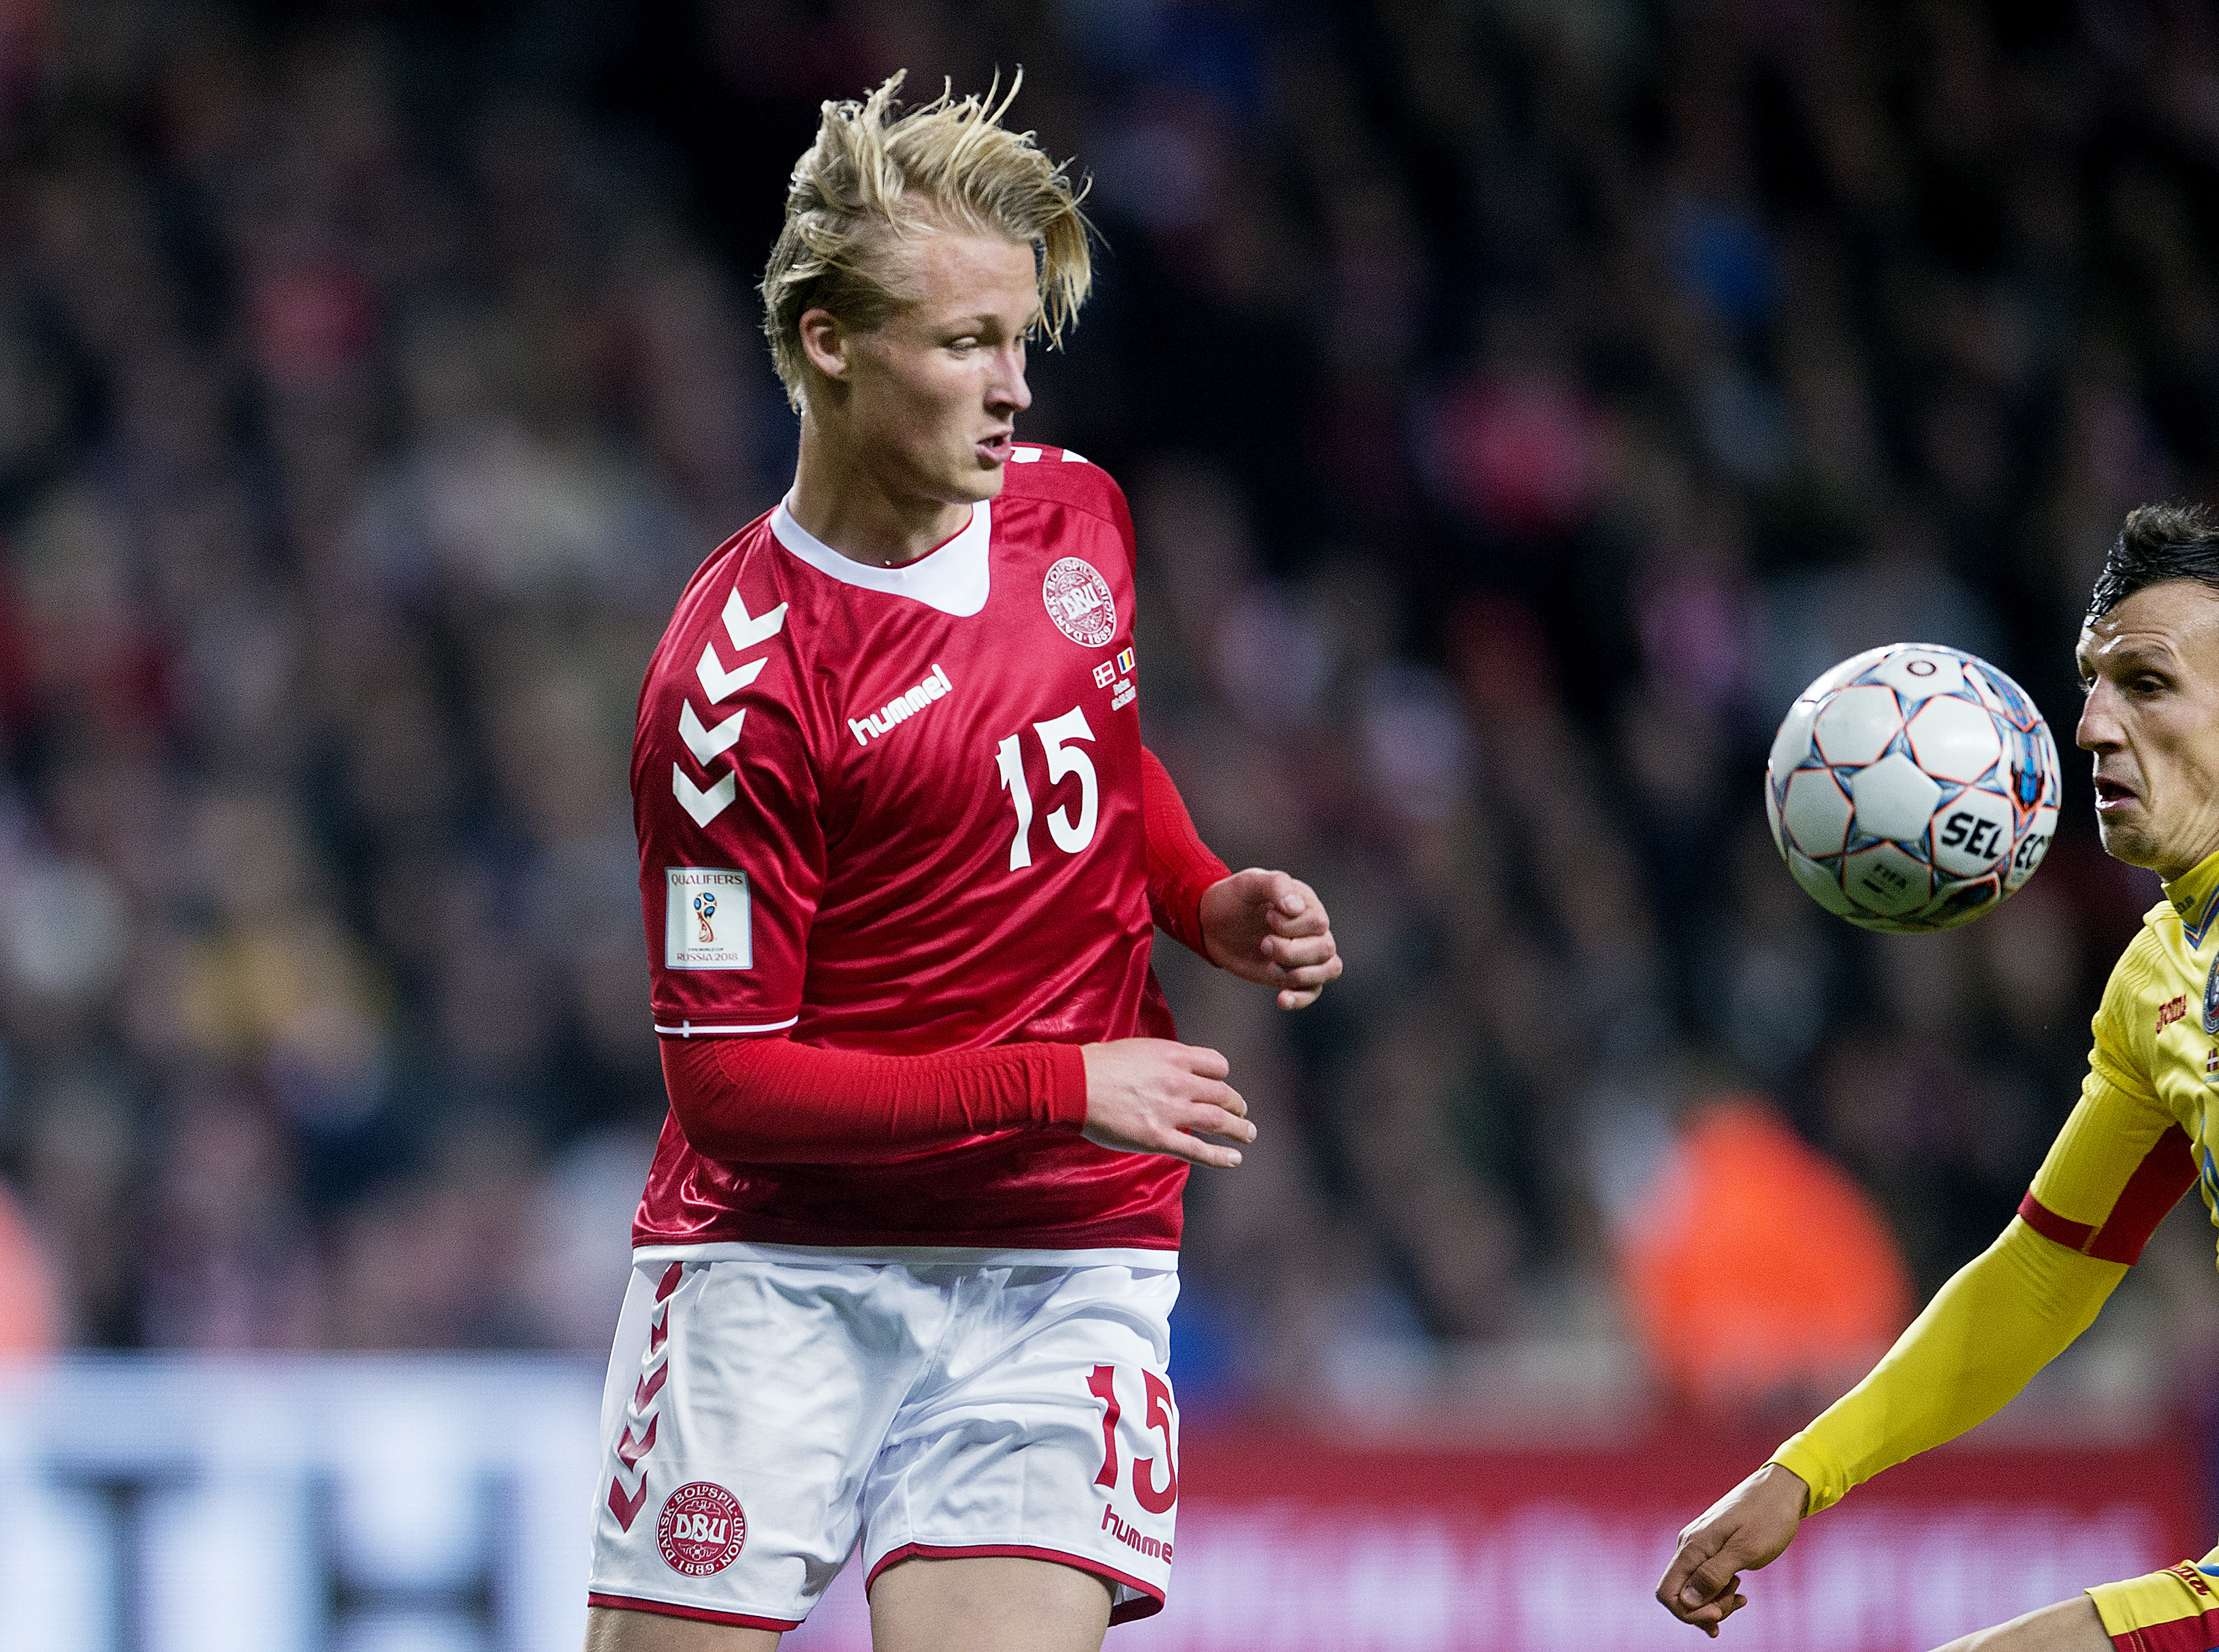 Denmark's forward Kasper Dolberg vies with Romania's Vlad Chiriches during the FIFA World Cup 2018 qualification football match between Denmark and Romania in Copenhagen on October 8, 2017. / AFP PHOTO / Scanpix Denmark AND Scanpix / Liselotte Sabroe / Denmark OUT        (Photo credit should read LISELOTTE SABROE/AFP/Getty Images)